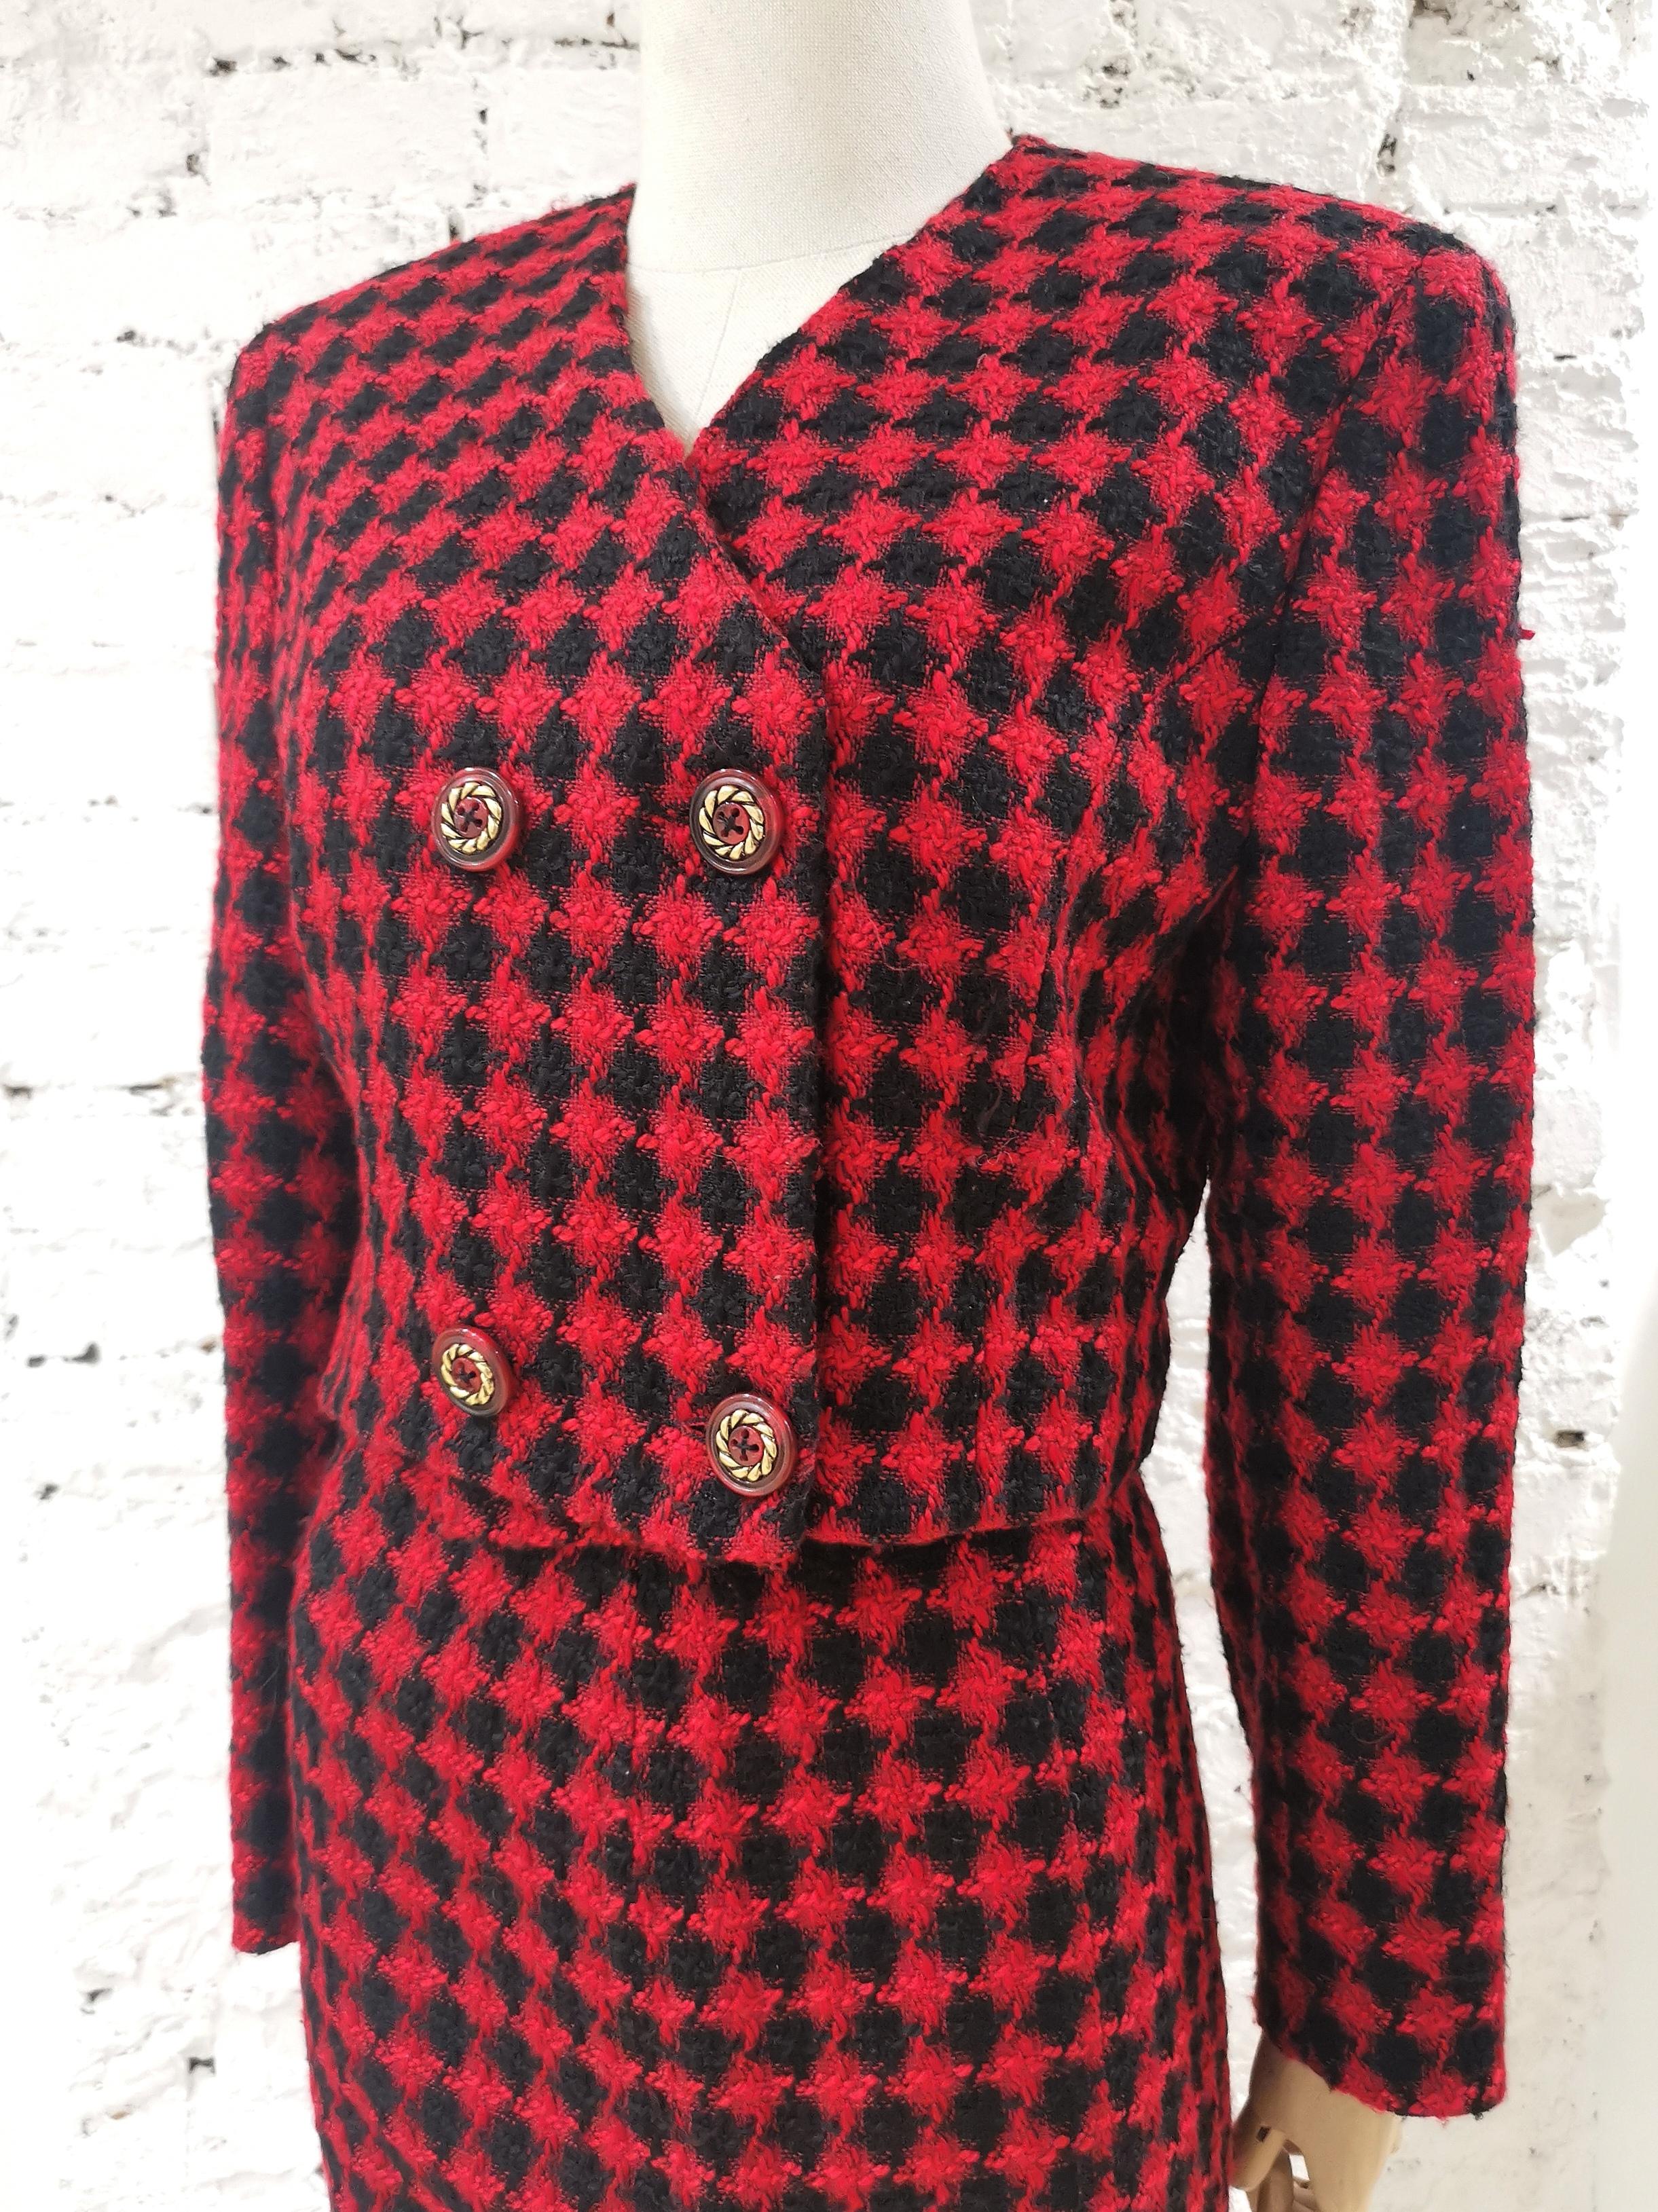 Gianni Versace red and black wool skirt suit
totally made in italy in size 46